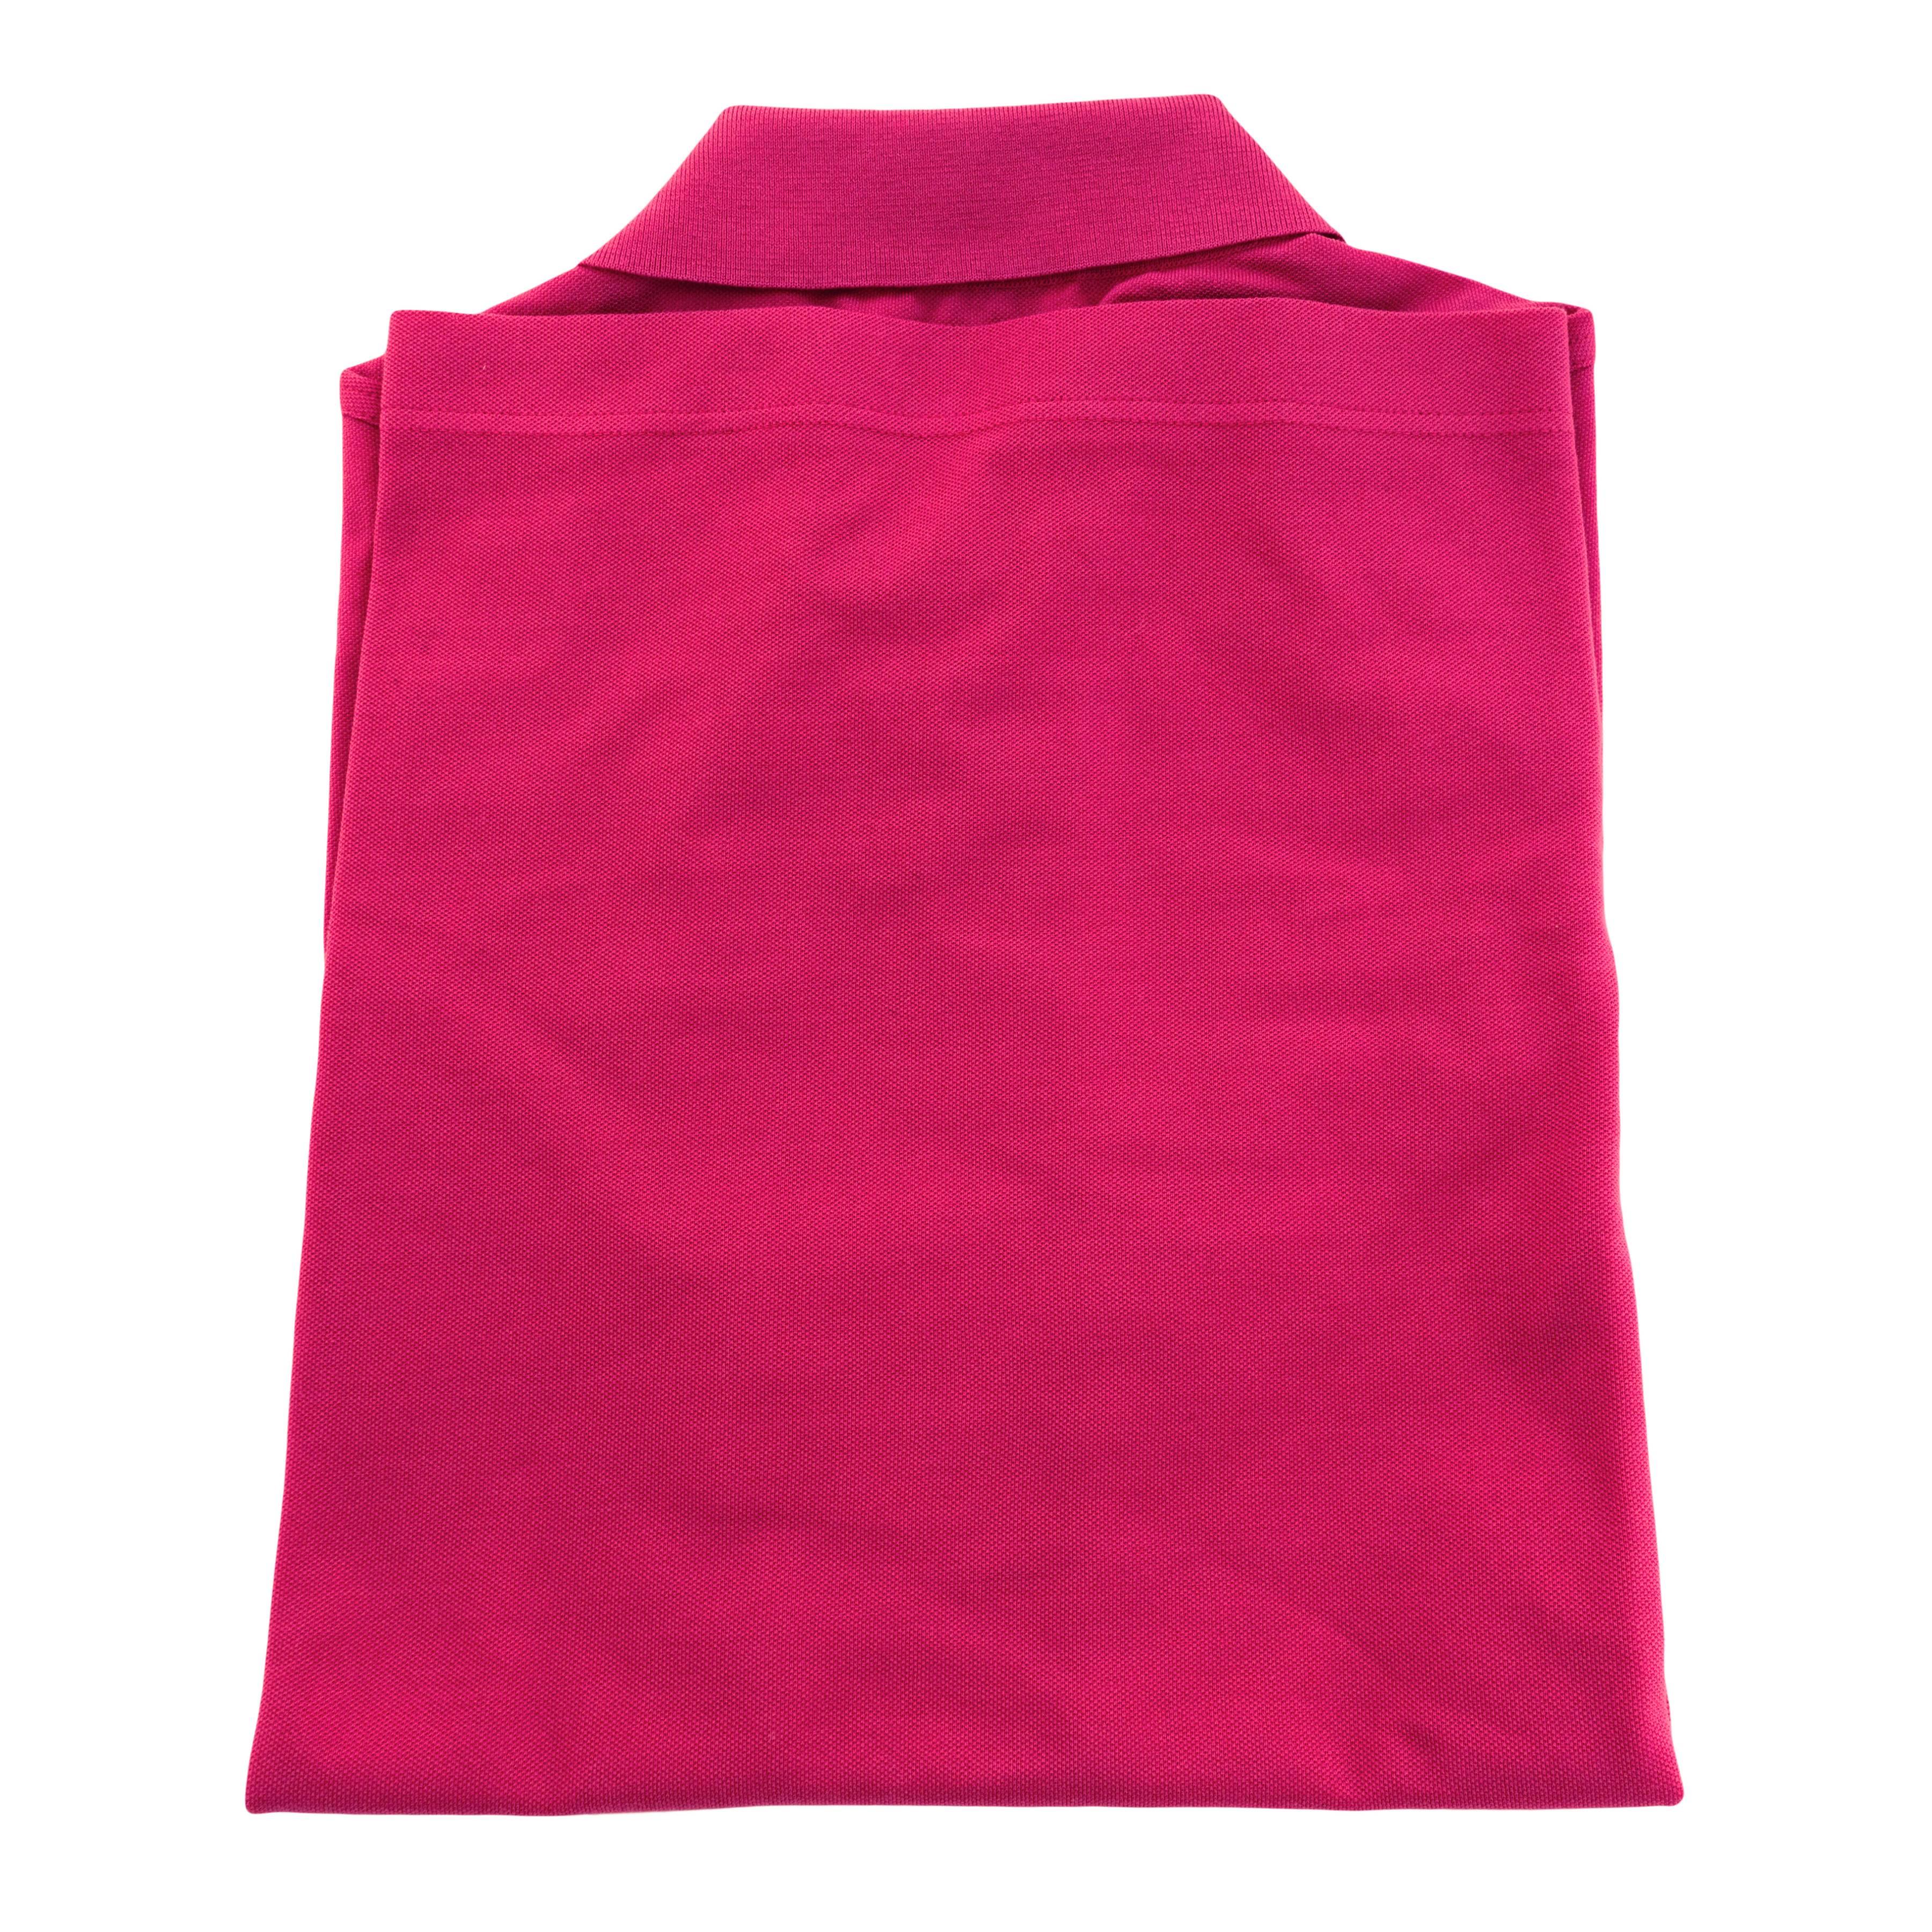 Hermes Rose Indian Men's Polo Short Sleeve Hot Pink Cotton Large Spring!
Store fresh.  Pristine condition.  Size Large. 
Below retail around $495 including tax where we are
Rose Indian is a hot pink that is just perfect for spring/summer!
Hermes